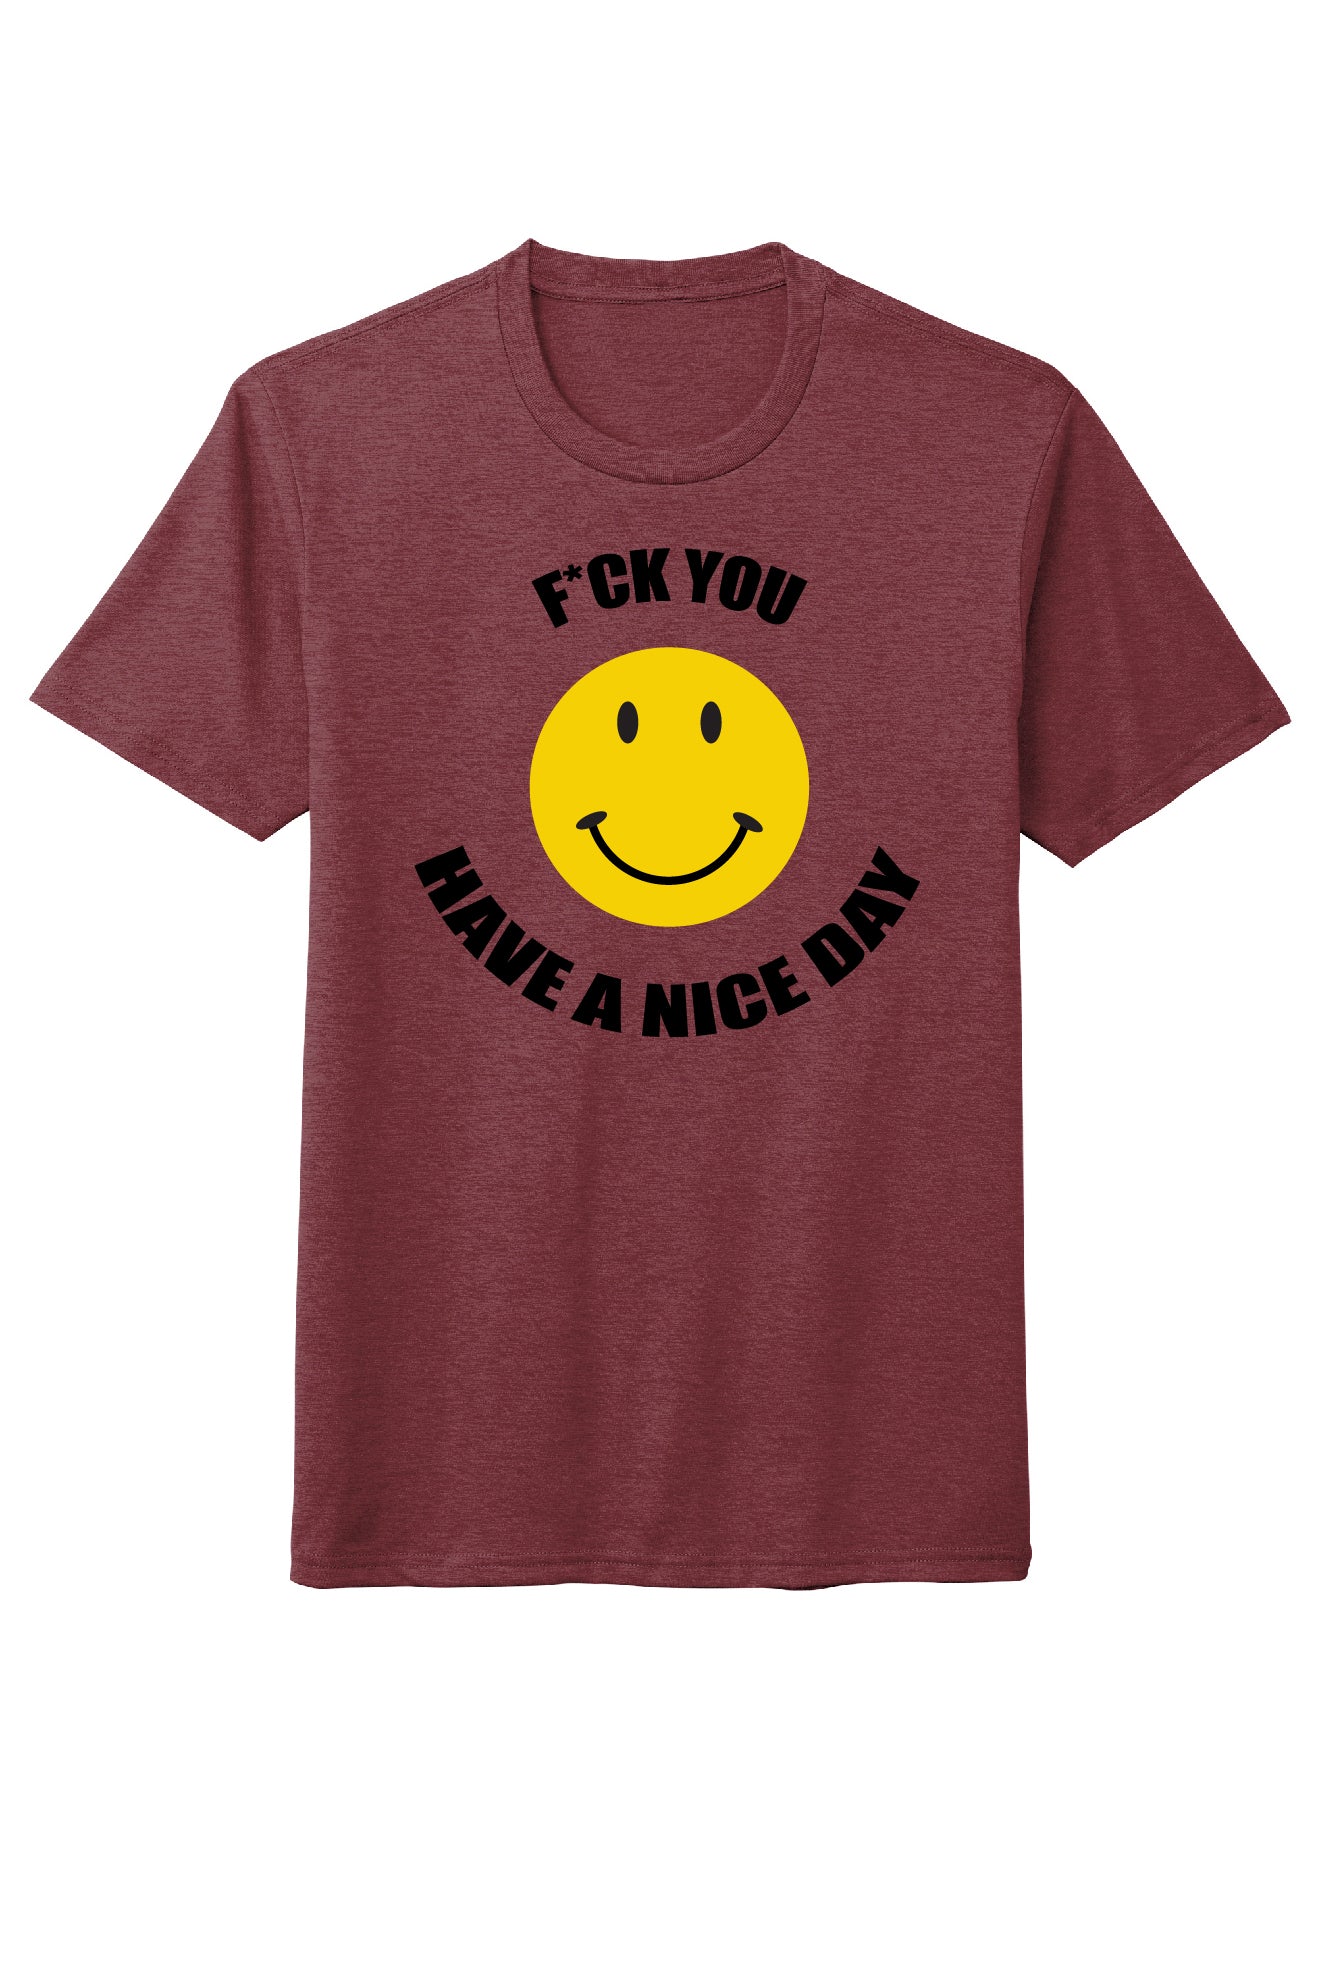 F*CK YOU, Have a Nice Day, Smiley Face Tee